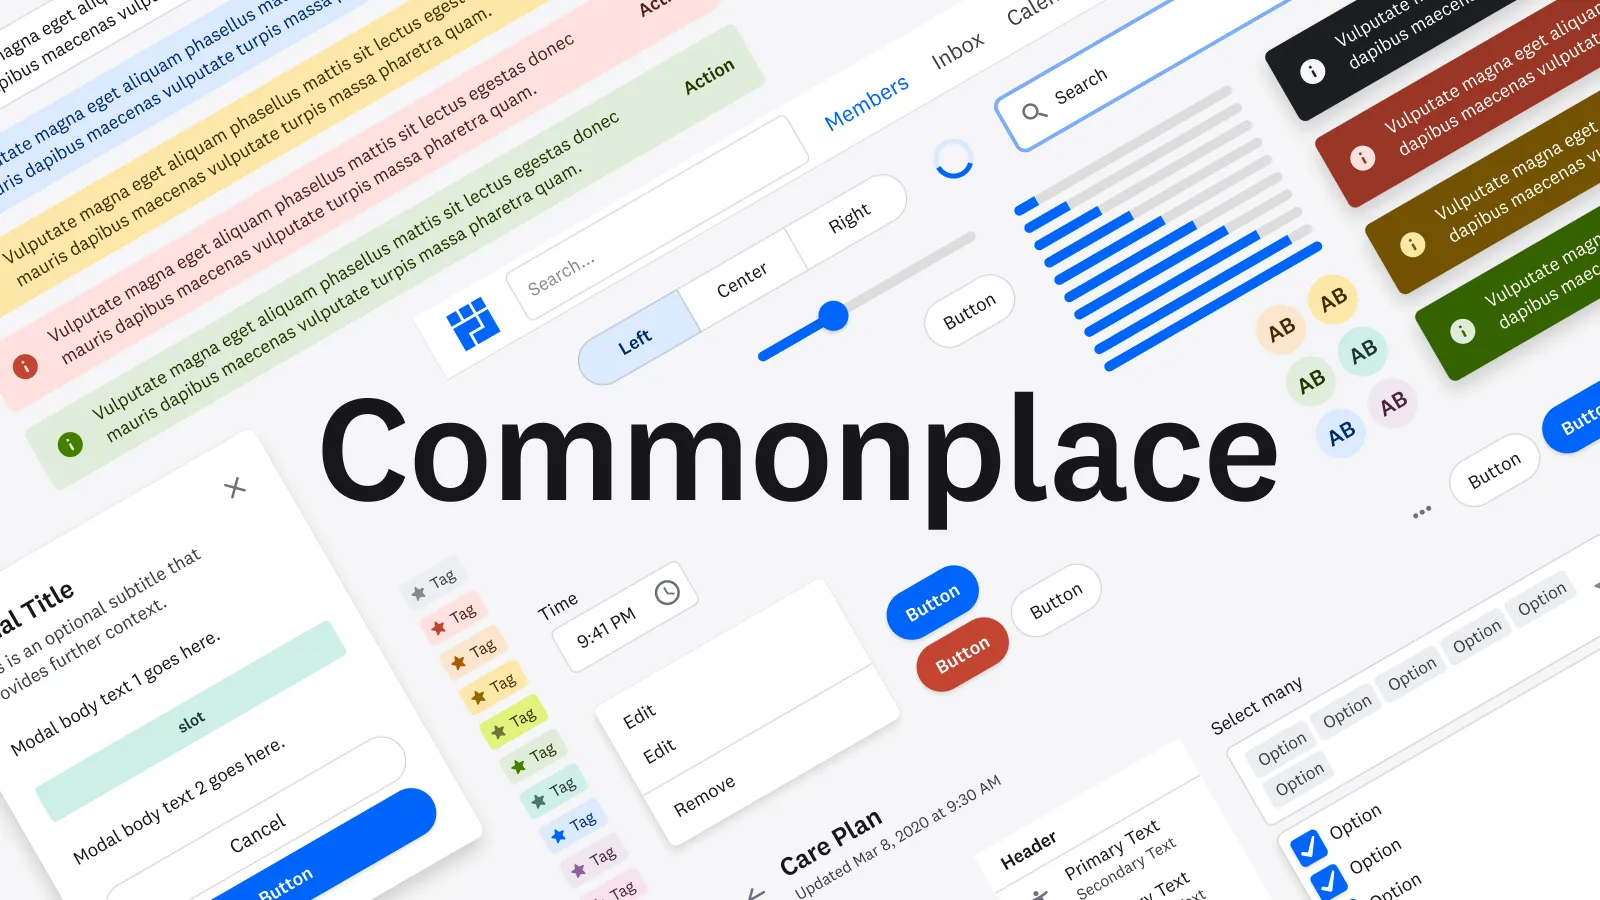 The word "Commonplace" is surrounded by components like buttons and progress bars.